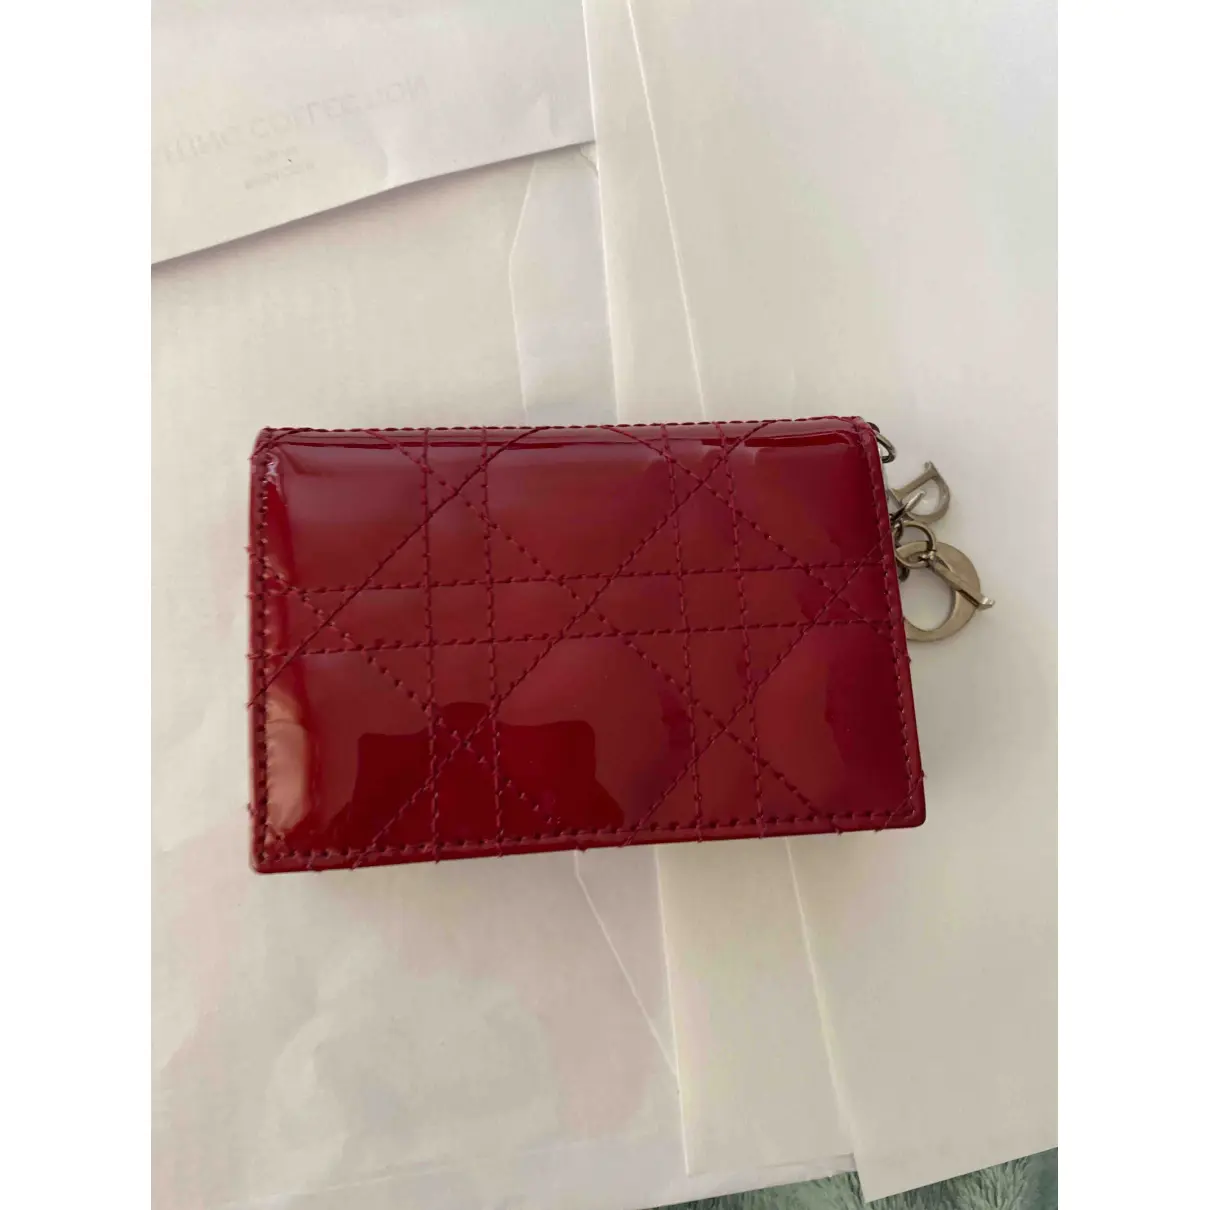 Buy Dior Patent leather card wallet online